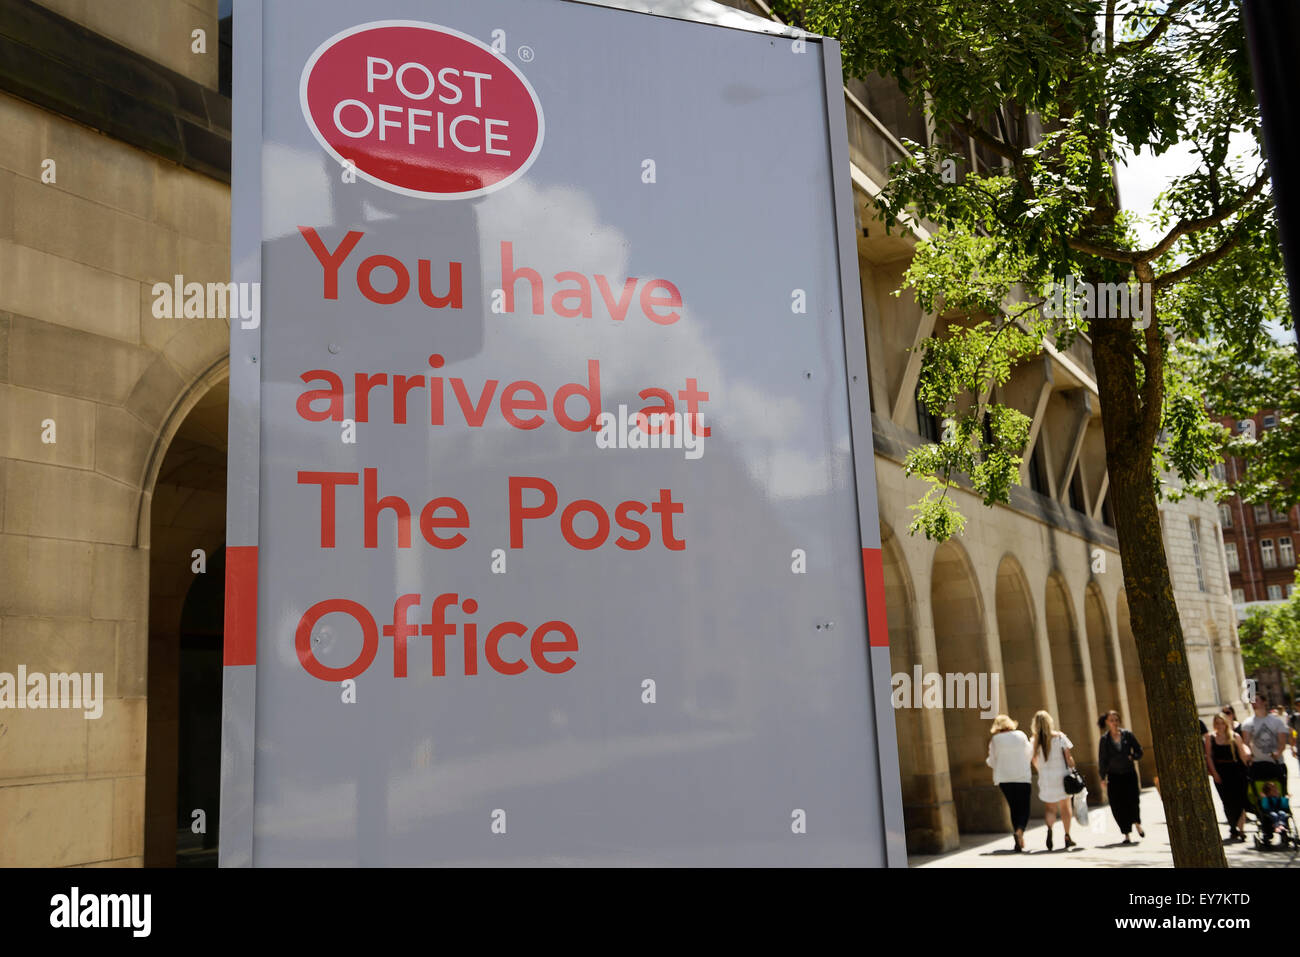 You have arrived at The Post Office sign on Mount Street in Manchester city centre UK Stock Photo